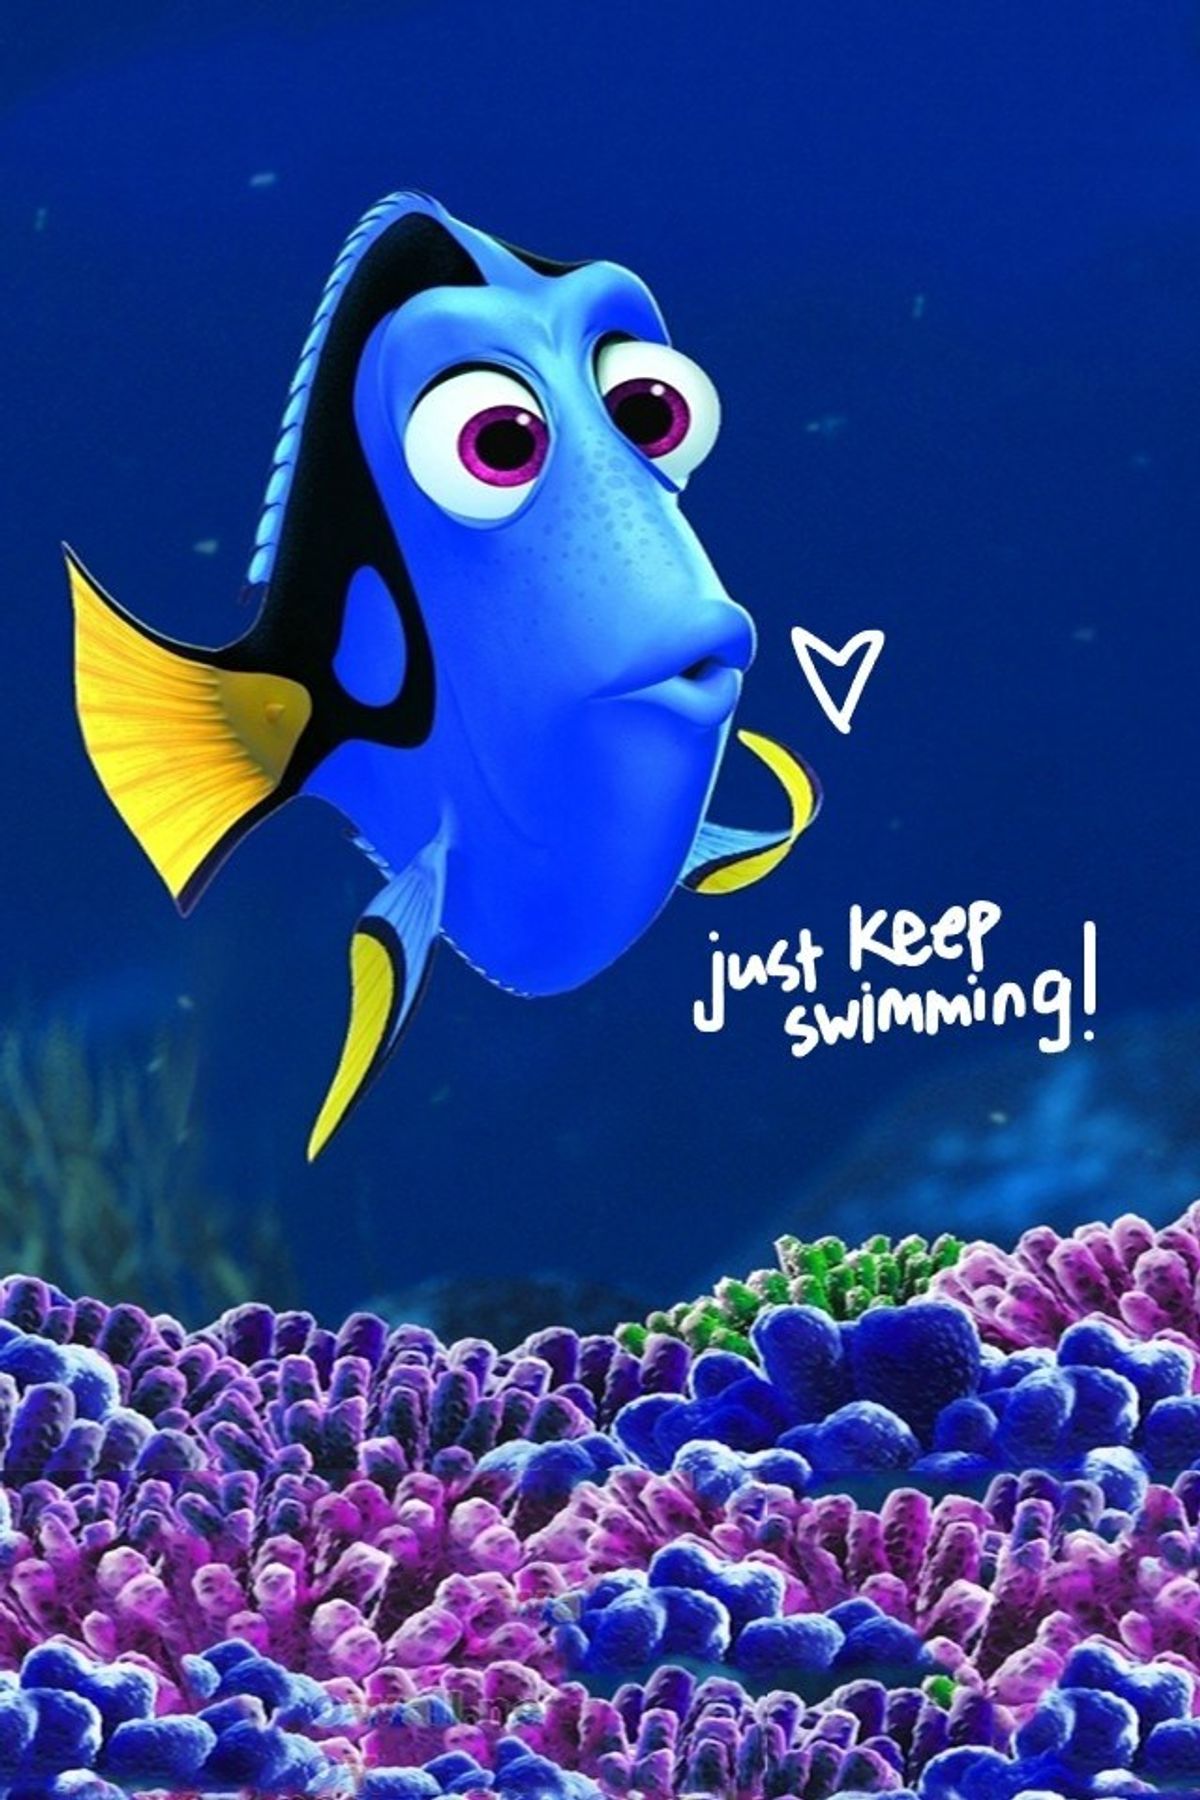 6 Major Life Lessons We Can Learn From Dory